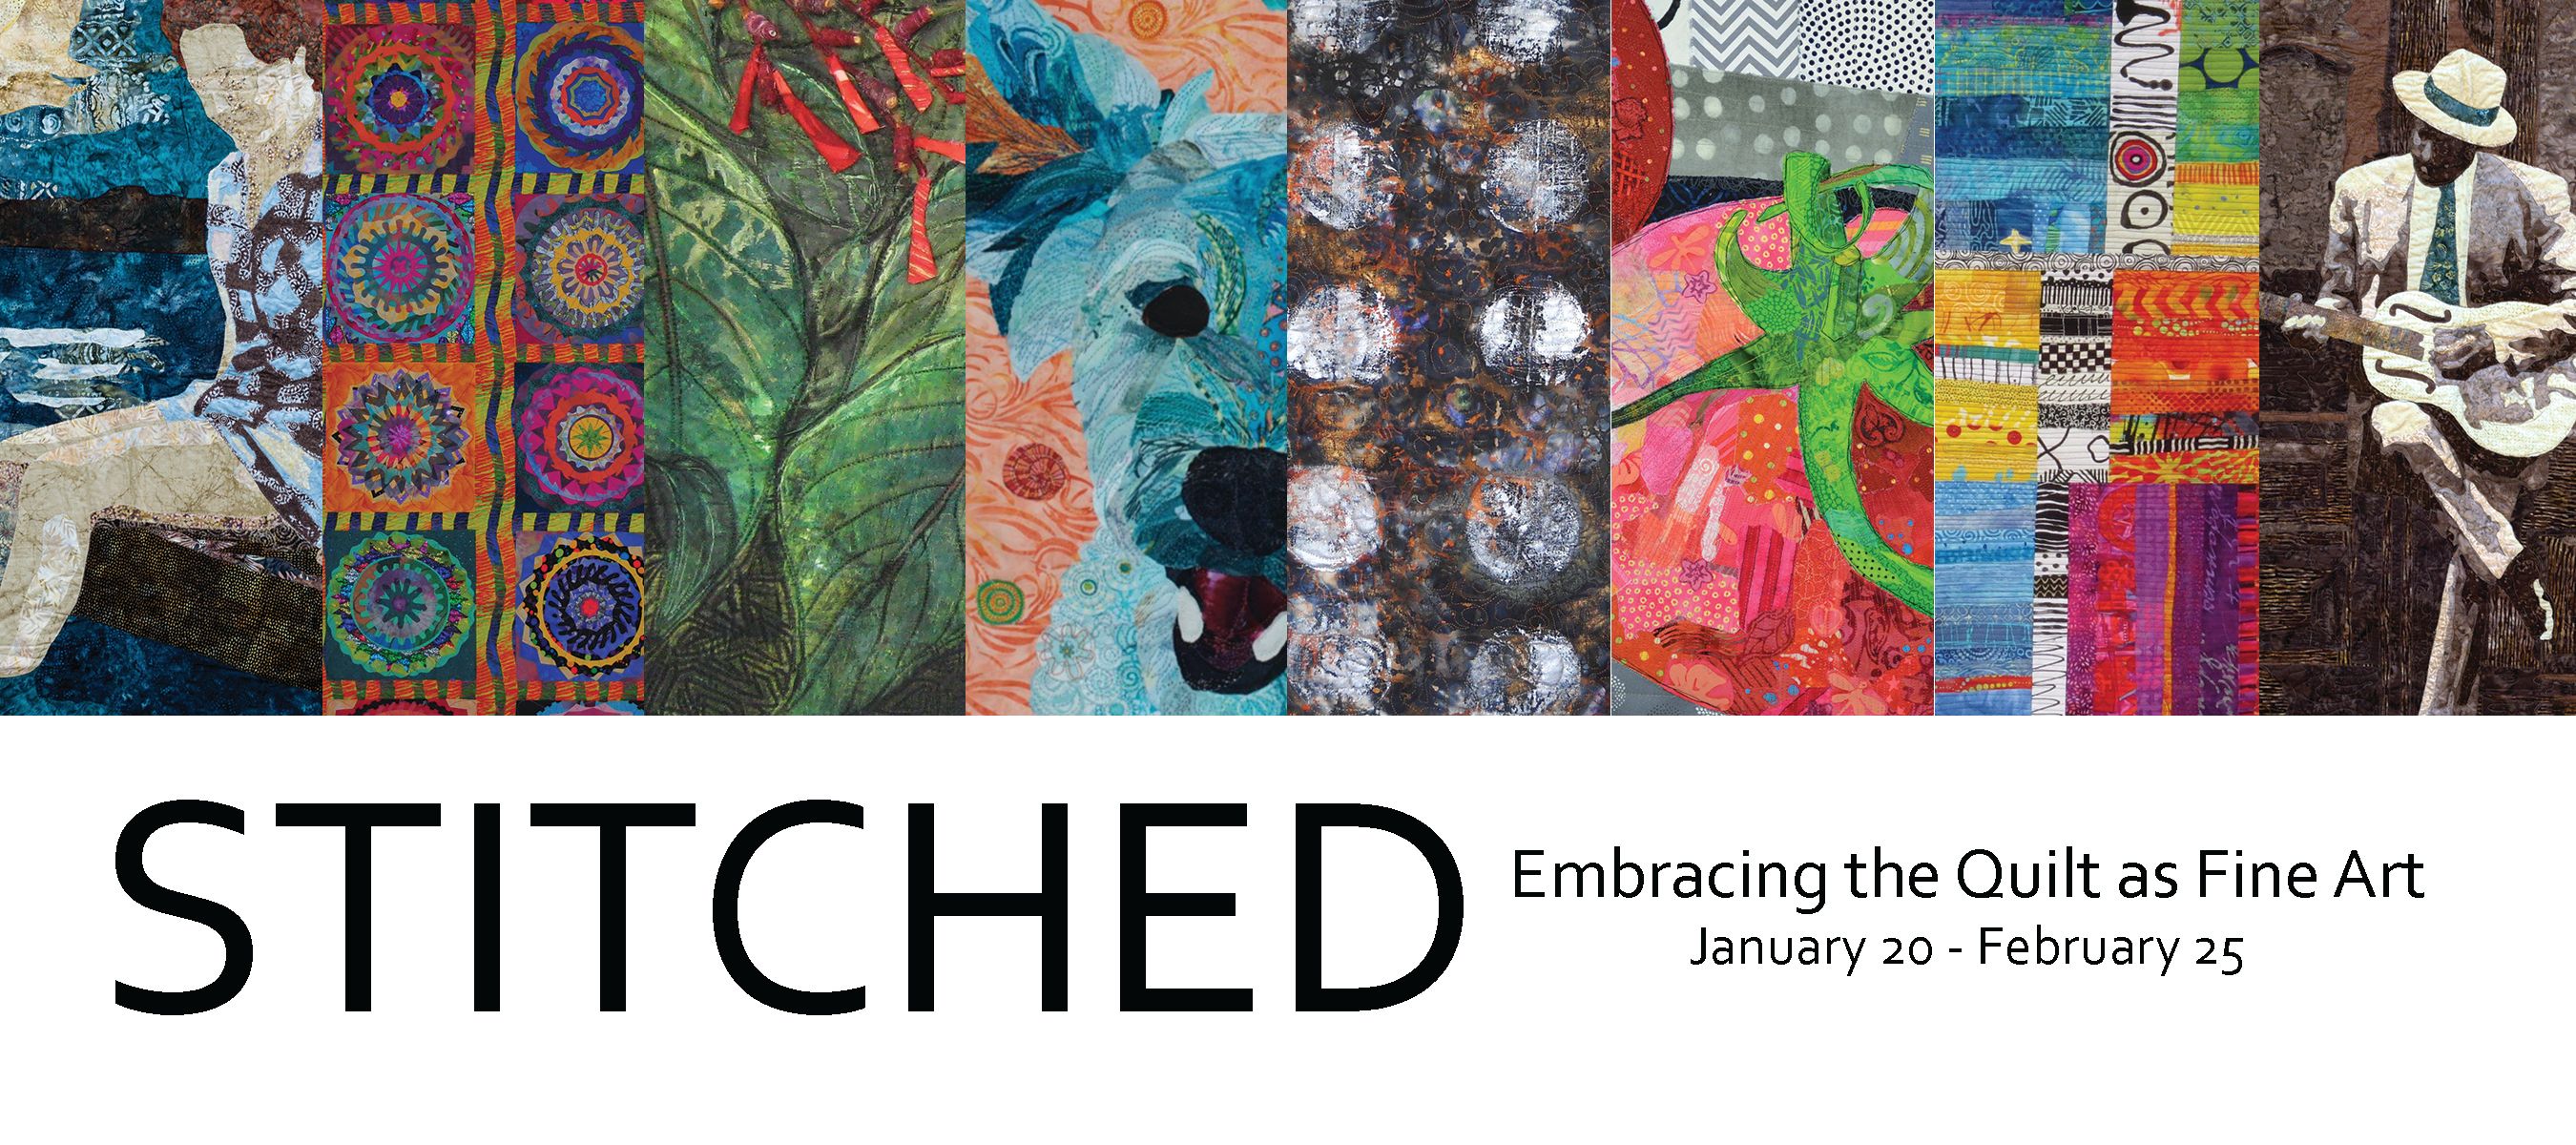 STITCHED: Embracing the Quilt as Fine Art